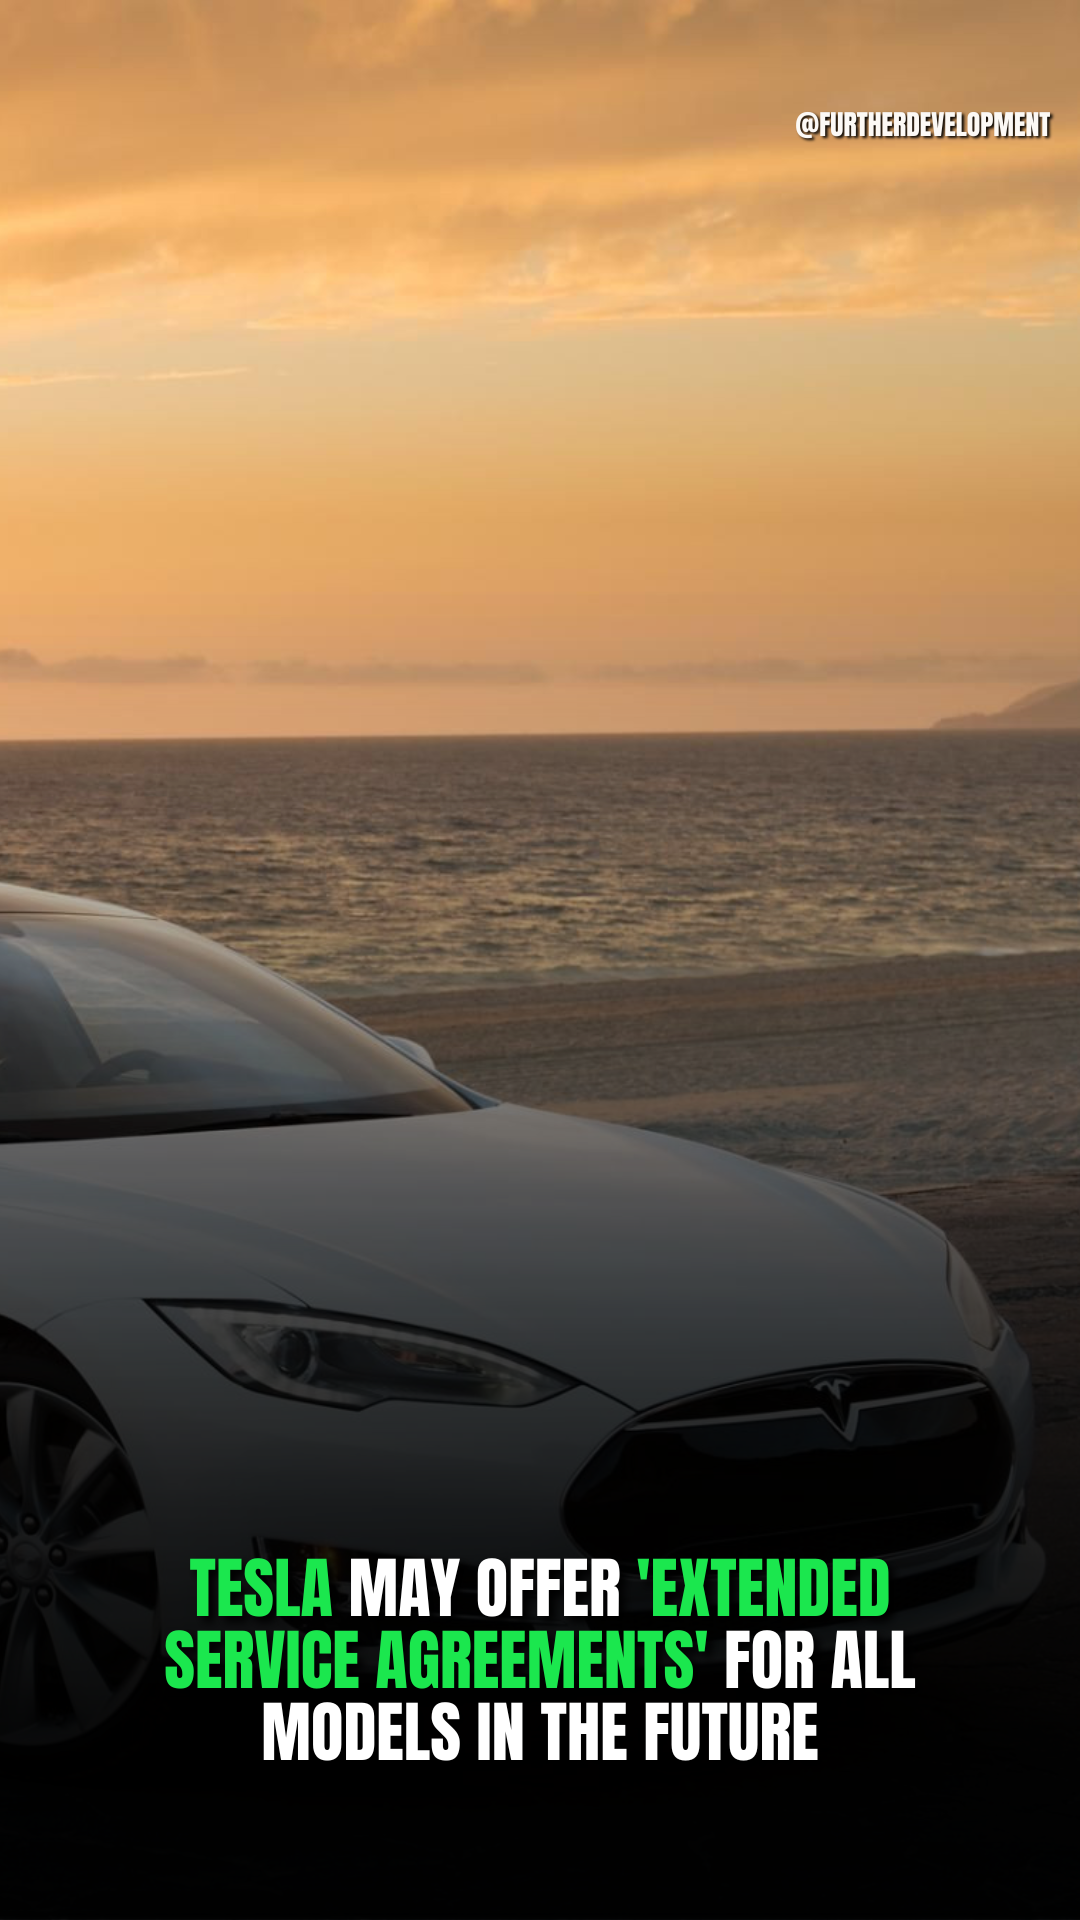 Tesla may offer 'Extended Service Agreements' for all models in the future